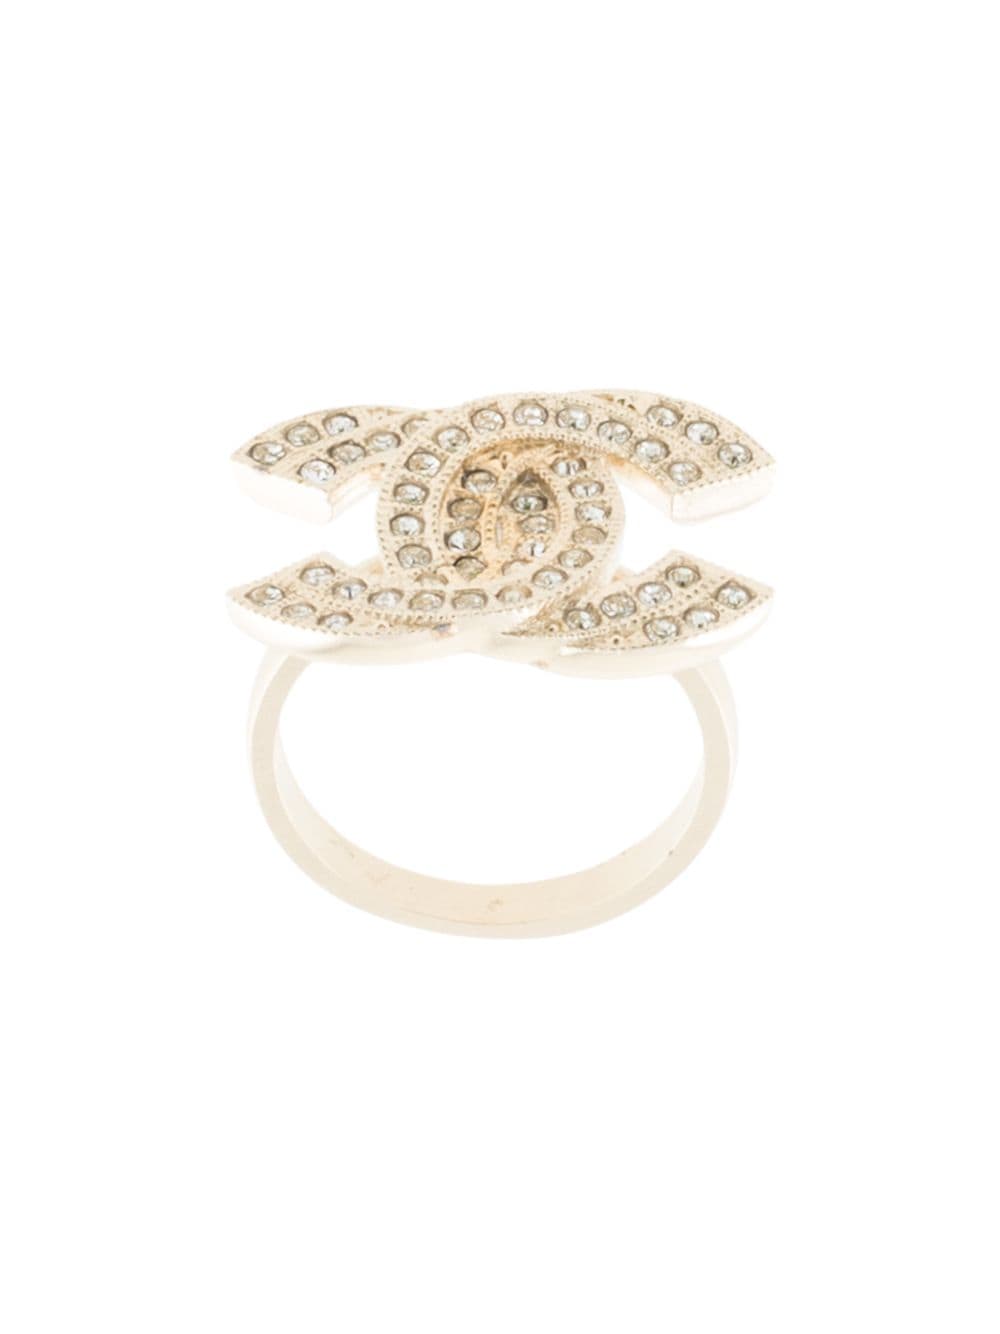 Louis Vuitton pre-owned Diamond Encrusted Ring - Farfetch